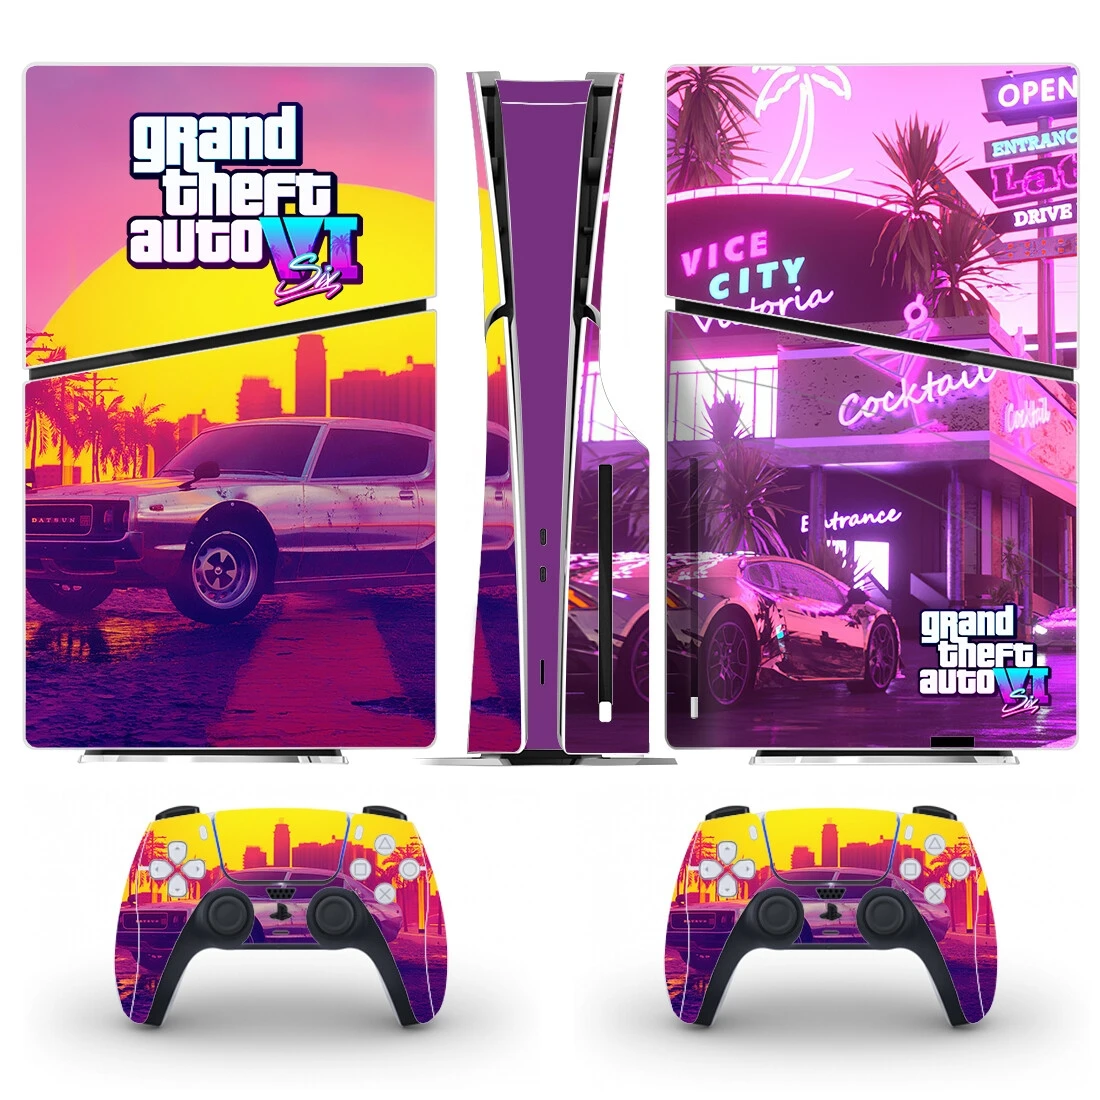 Grand Theft Auto VI GTA 6 PS5 Slim Disc Skin Sticker Decal Cover for  Console and 2 Controllers New PS5 Slim Disk Skin Vinyl - AliExpress